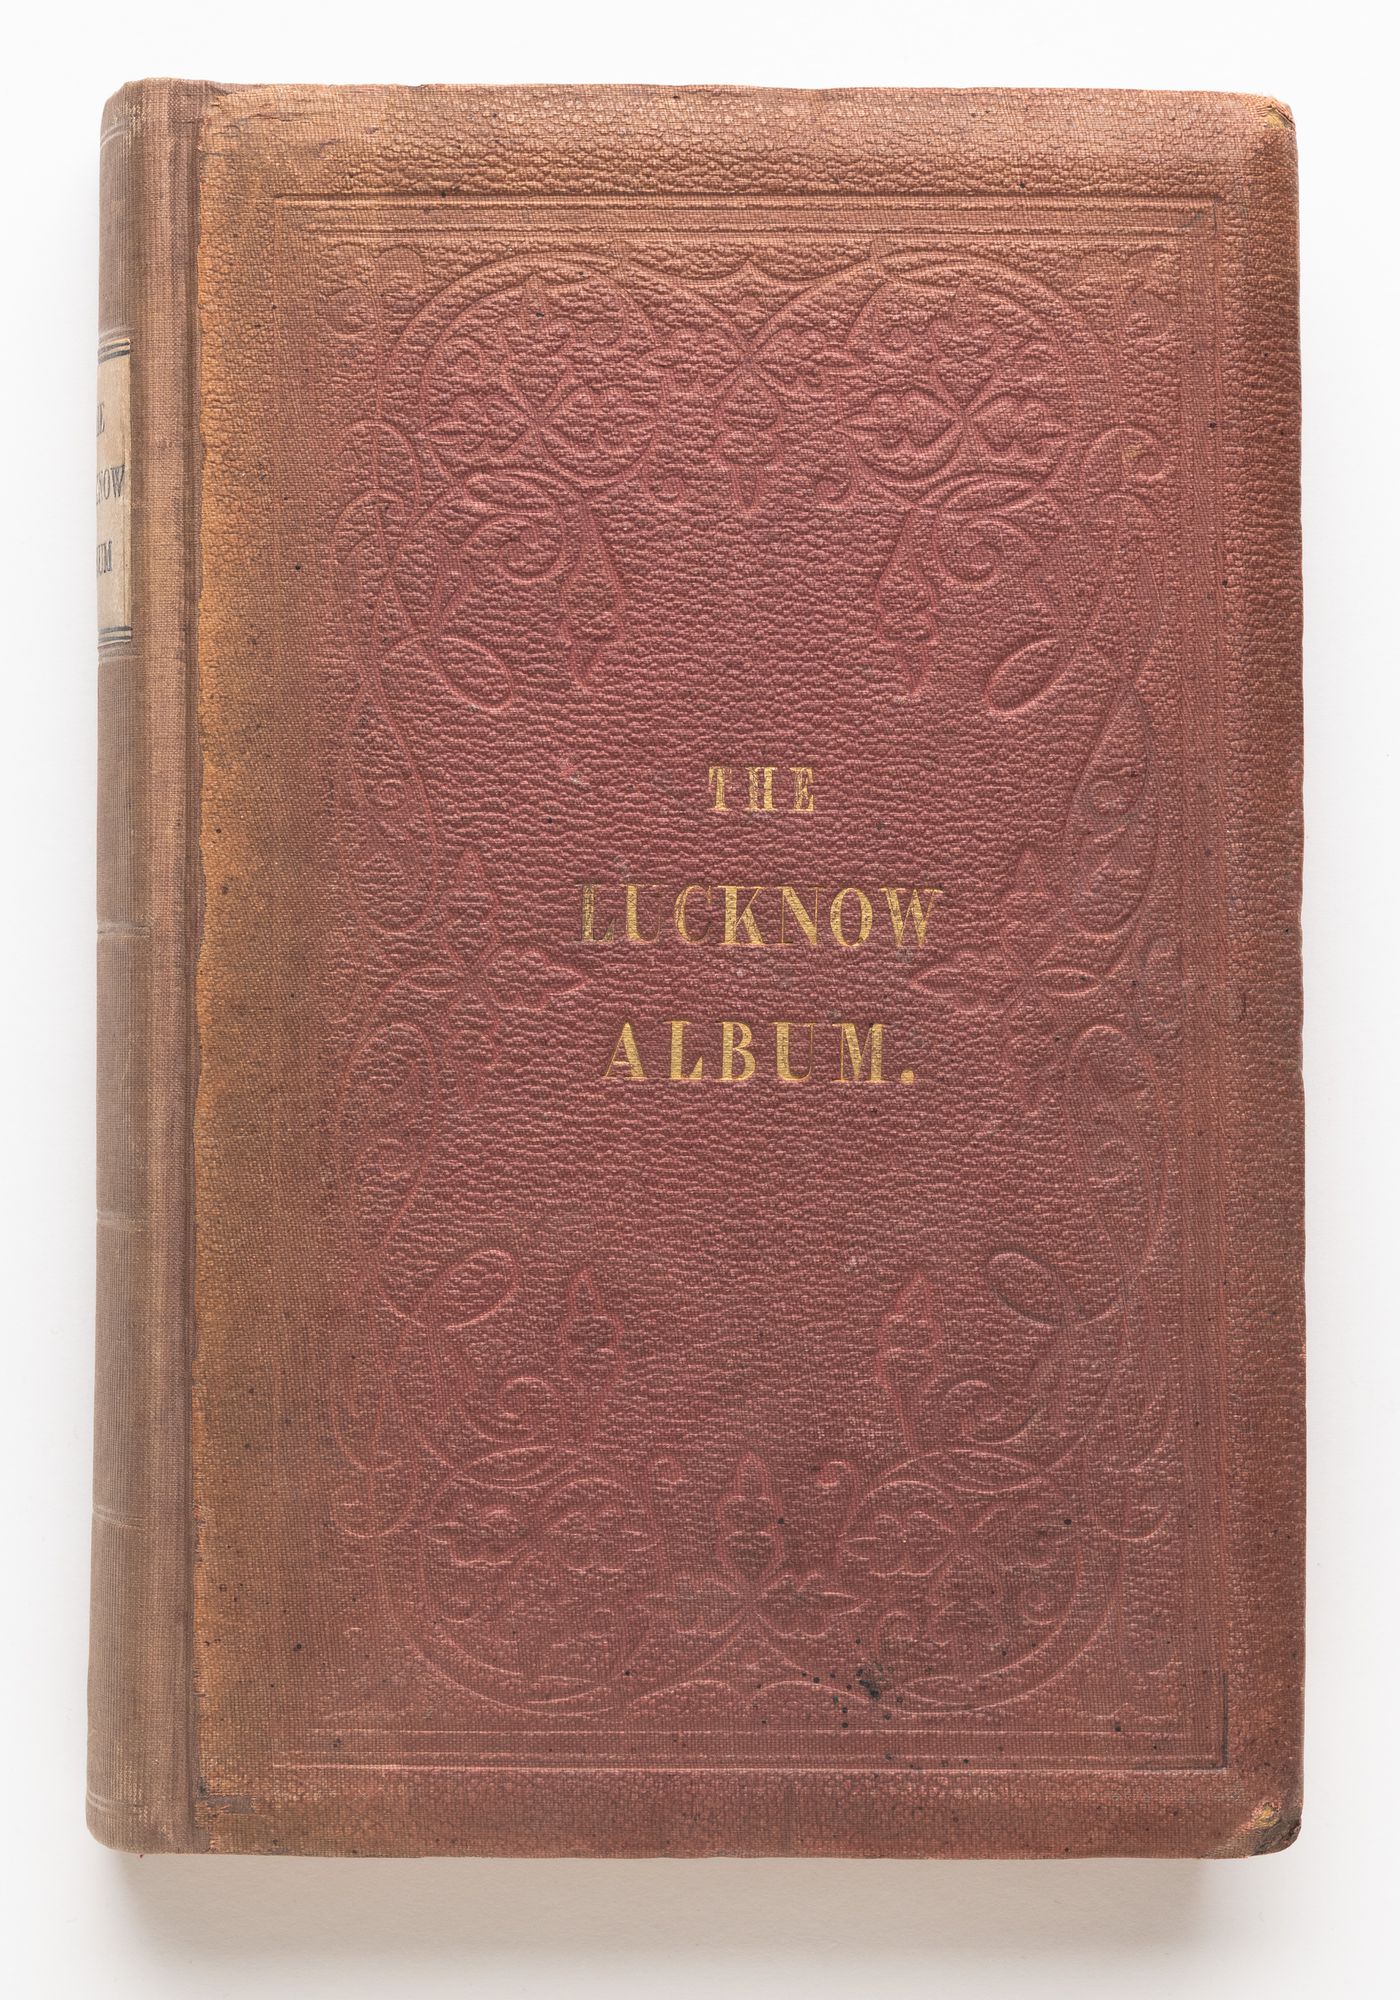 The Lucknow album: containing a series of fifty photographic views of Lucknow and its environs together with a large sized plan of the city, Lucknow. India